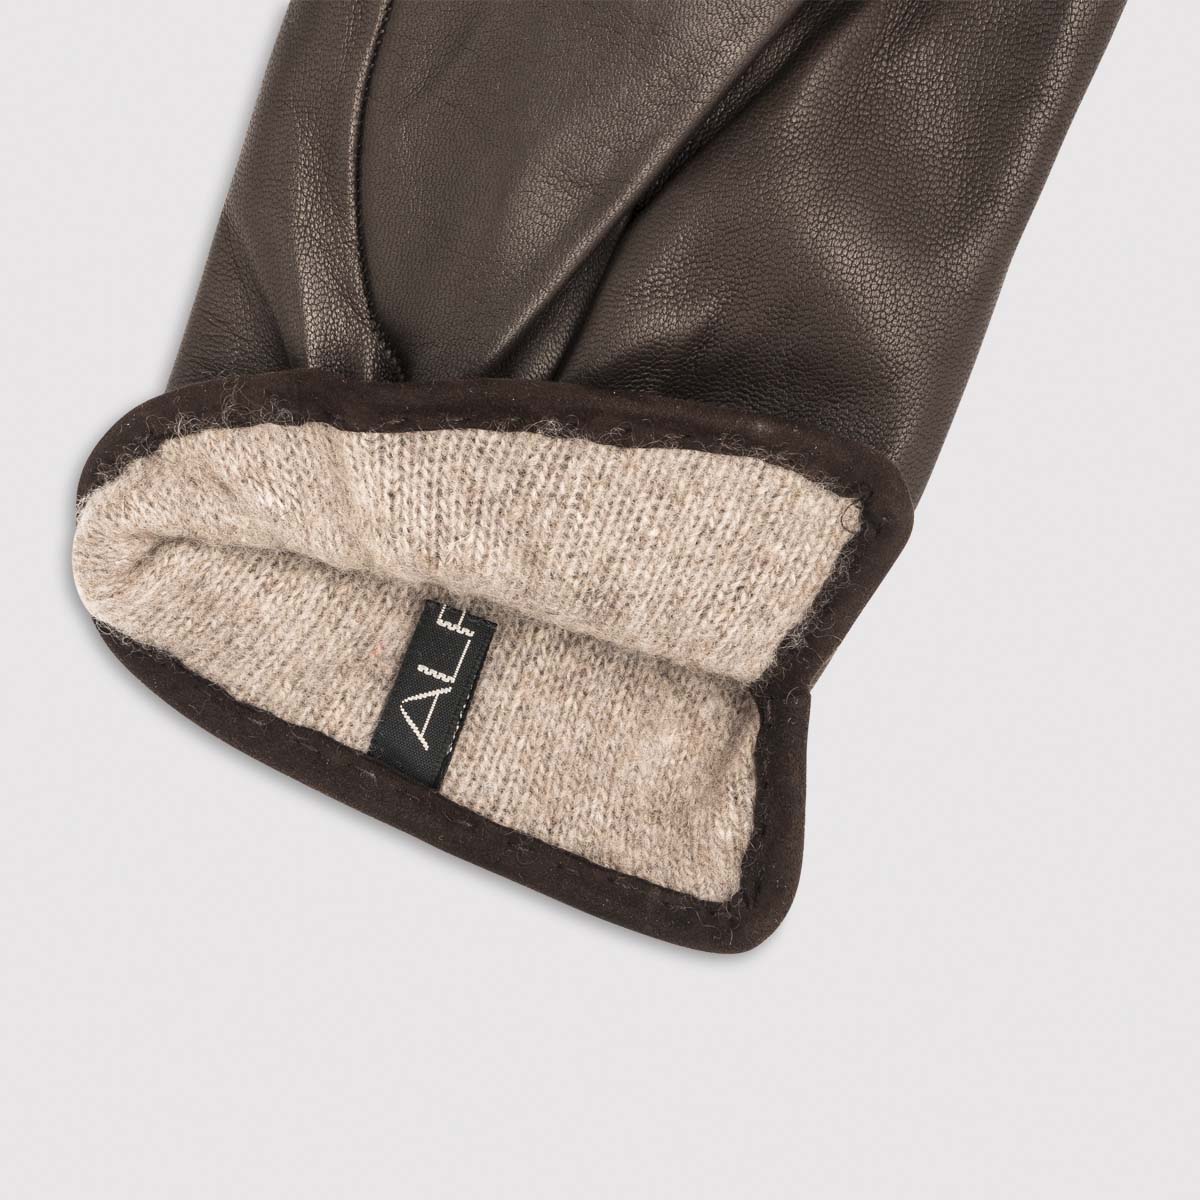 Nappa Leather Glove with Cashmere Lining in Mocca Alpo Guanti on sale 2022 2